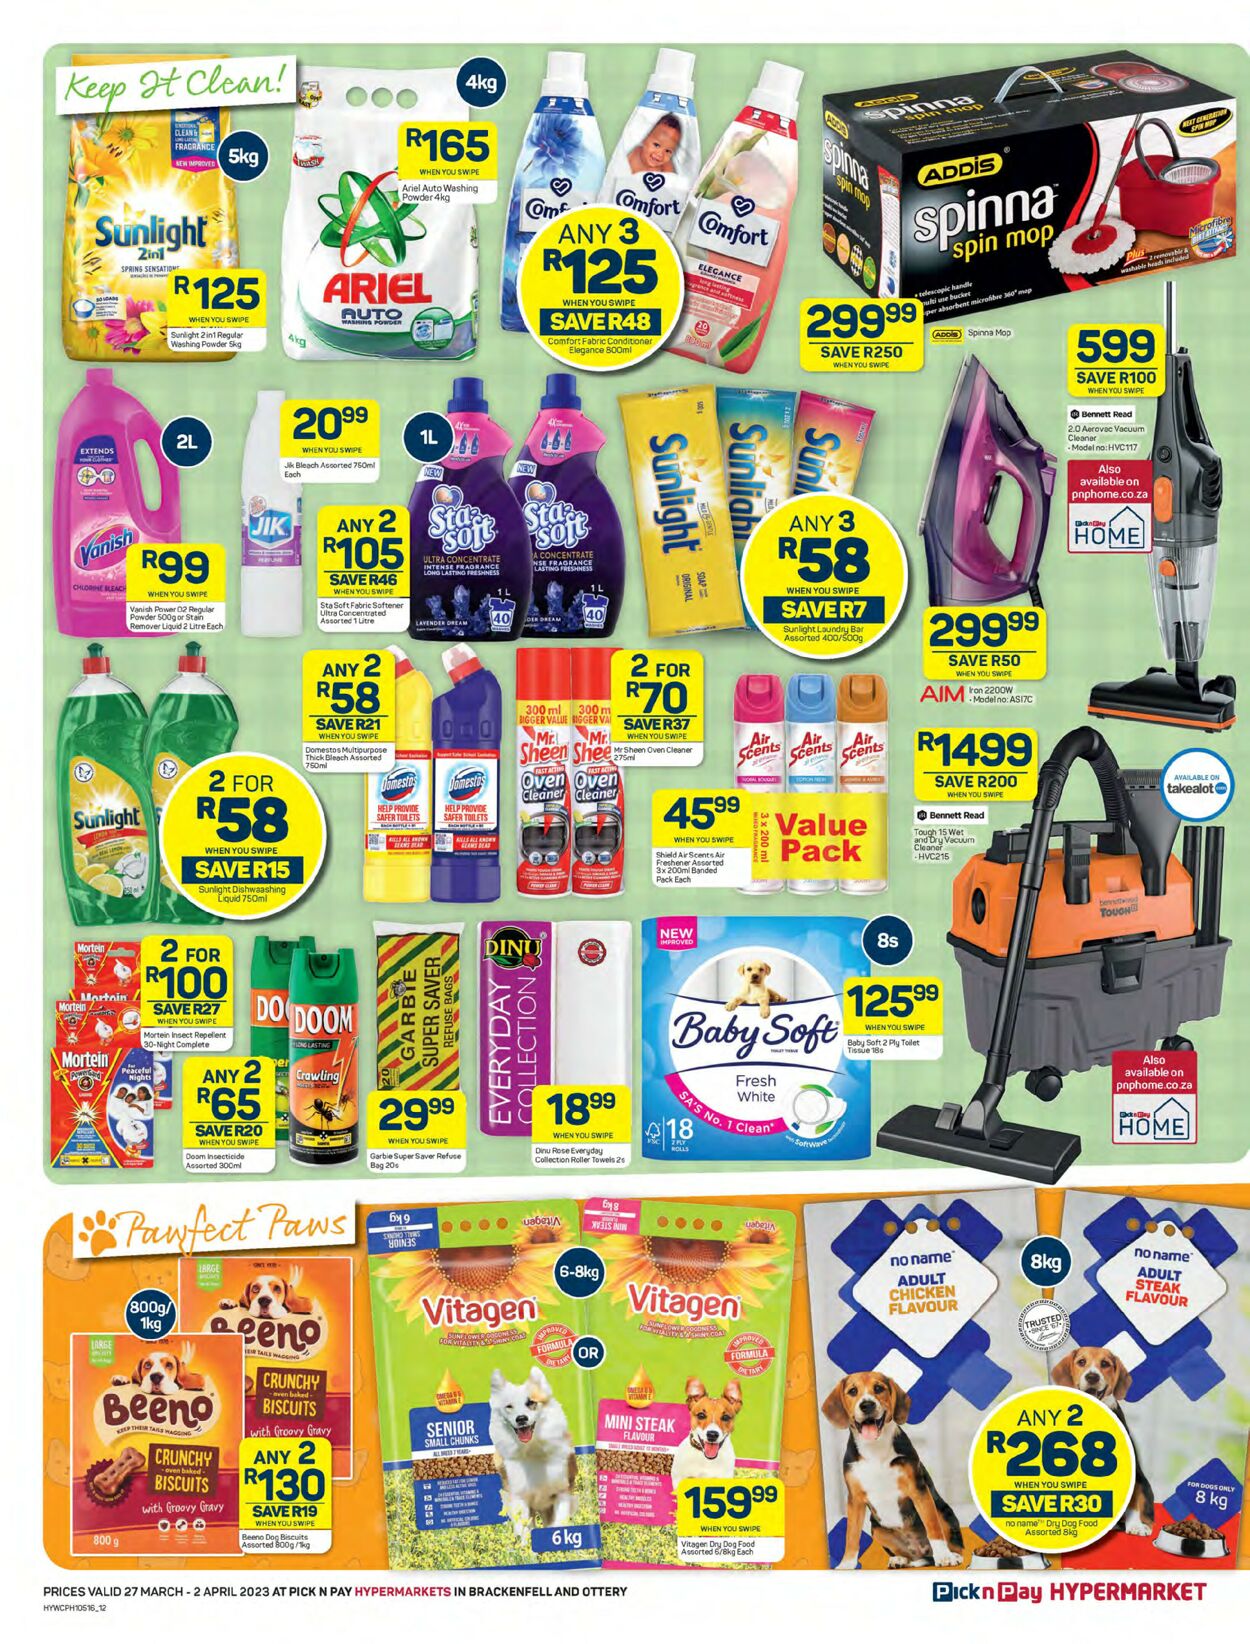 Pick n Pay Catalogue - 2023/03/27-2023/04/02 (Page 12)